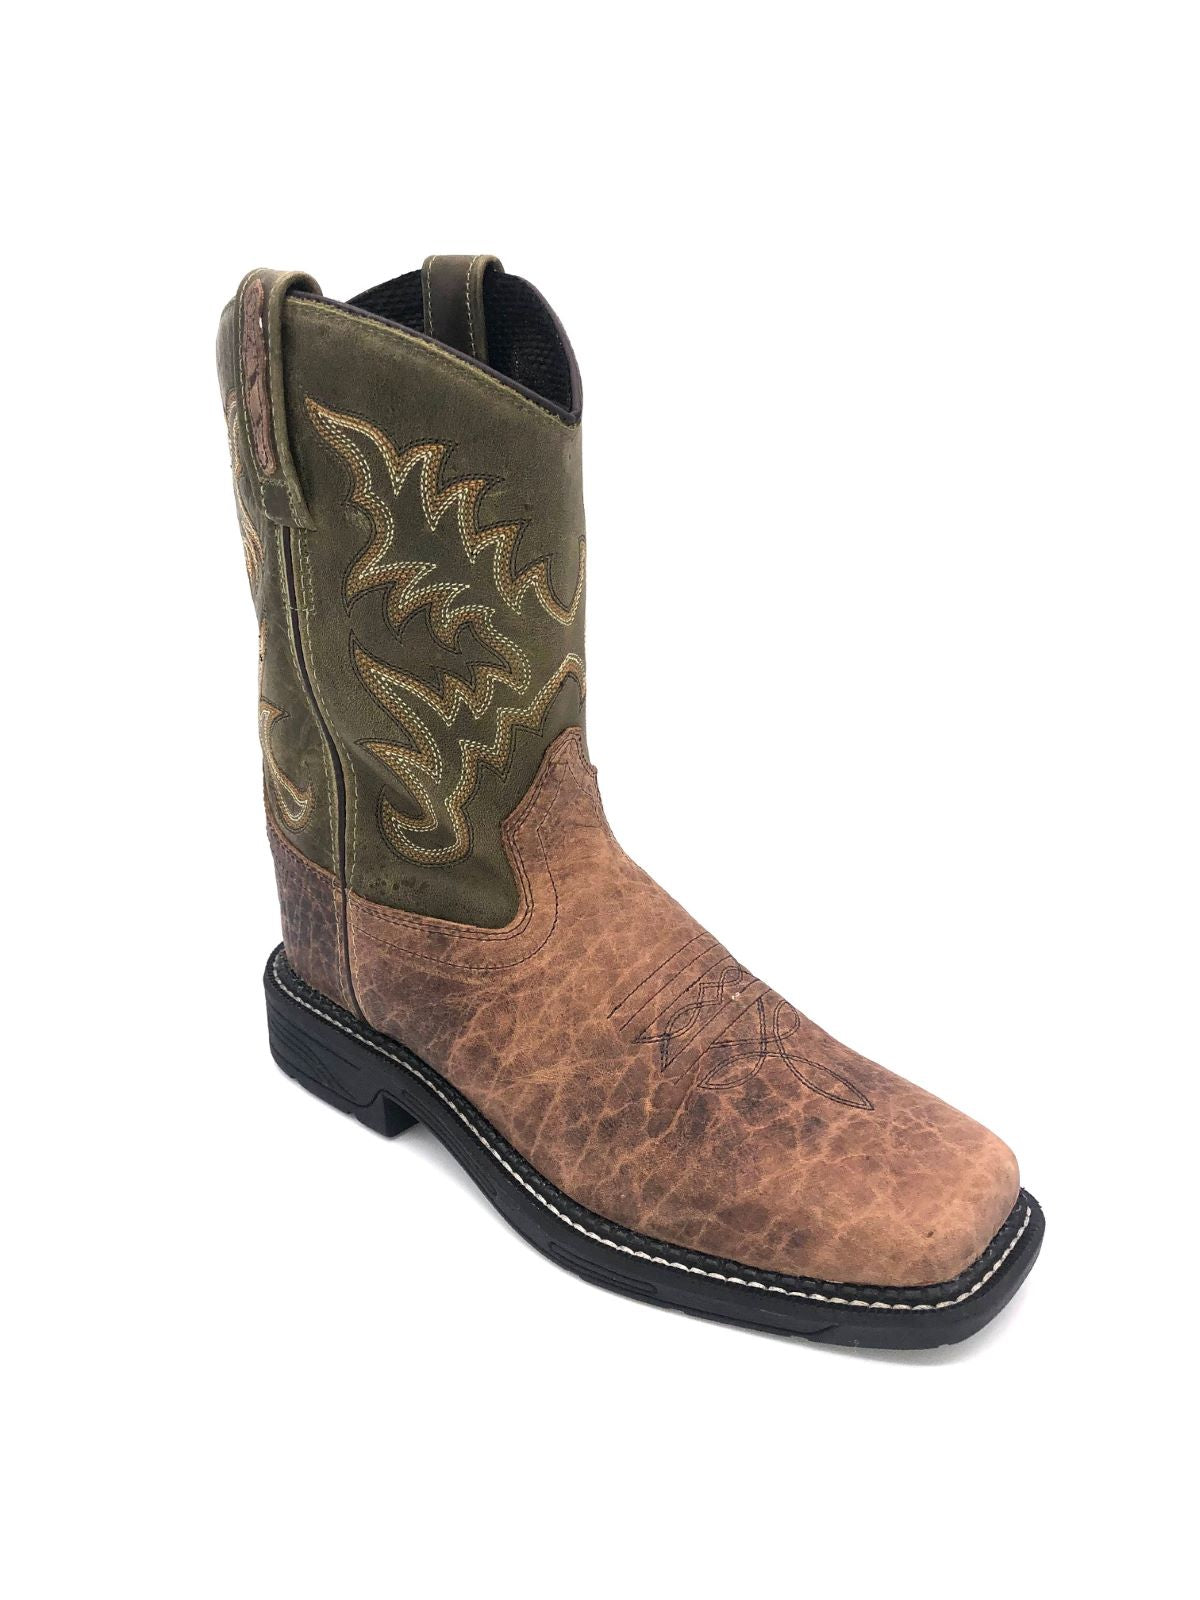 'Old West' Children's Western Broad Square Toe - Brown / Green